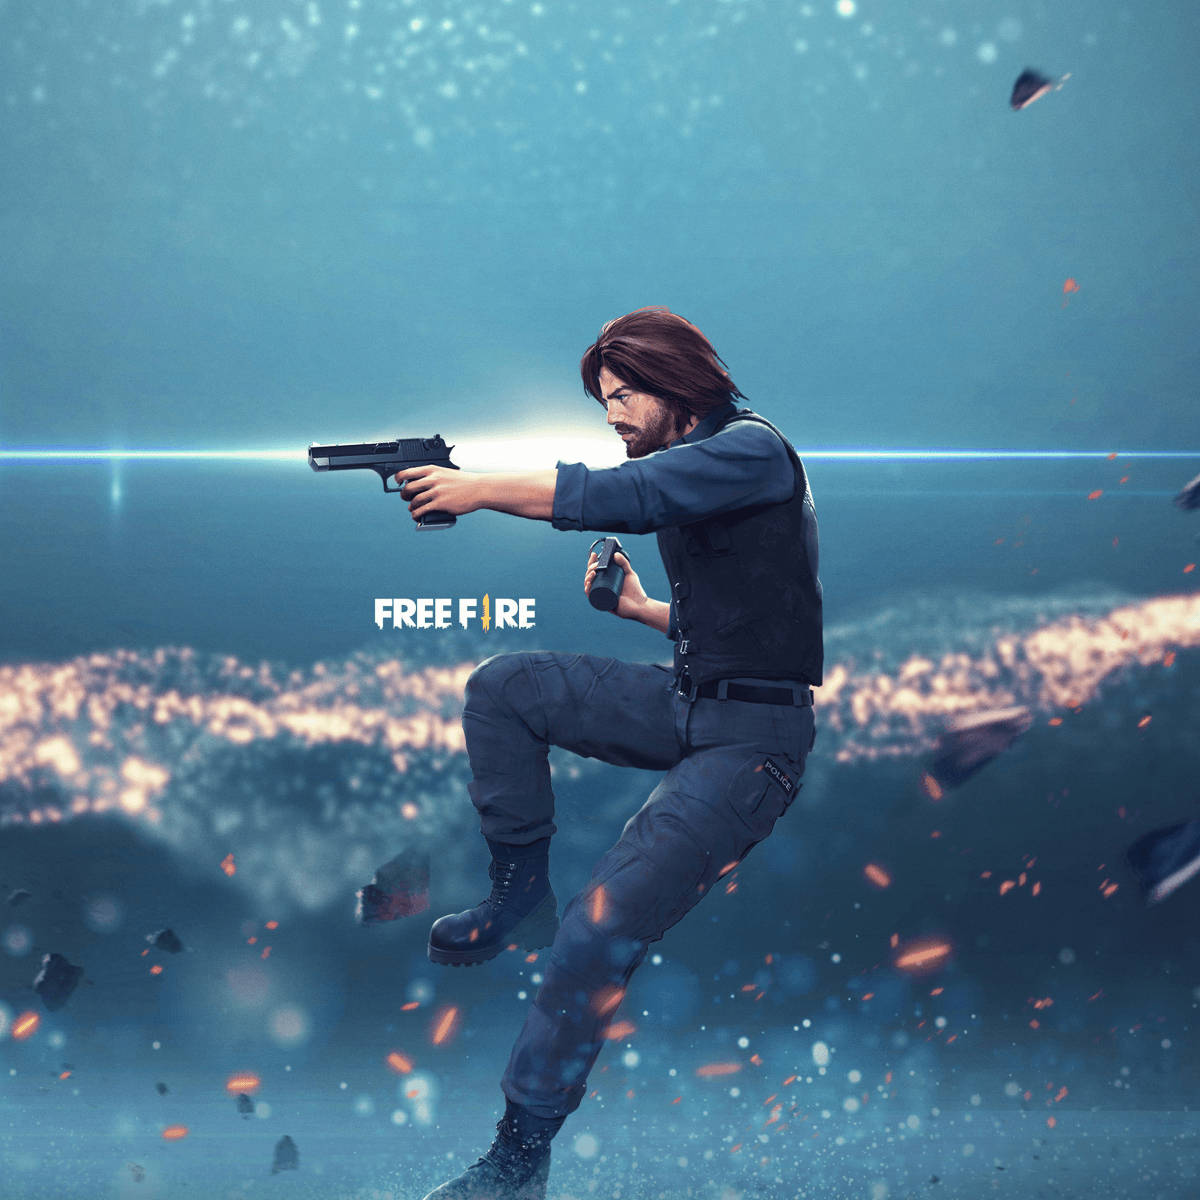 Shooting Andrew Free Fire Game Wallpaper